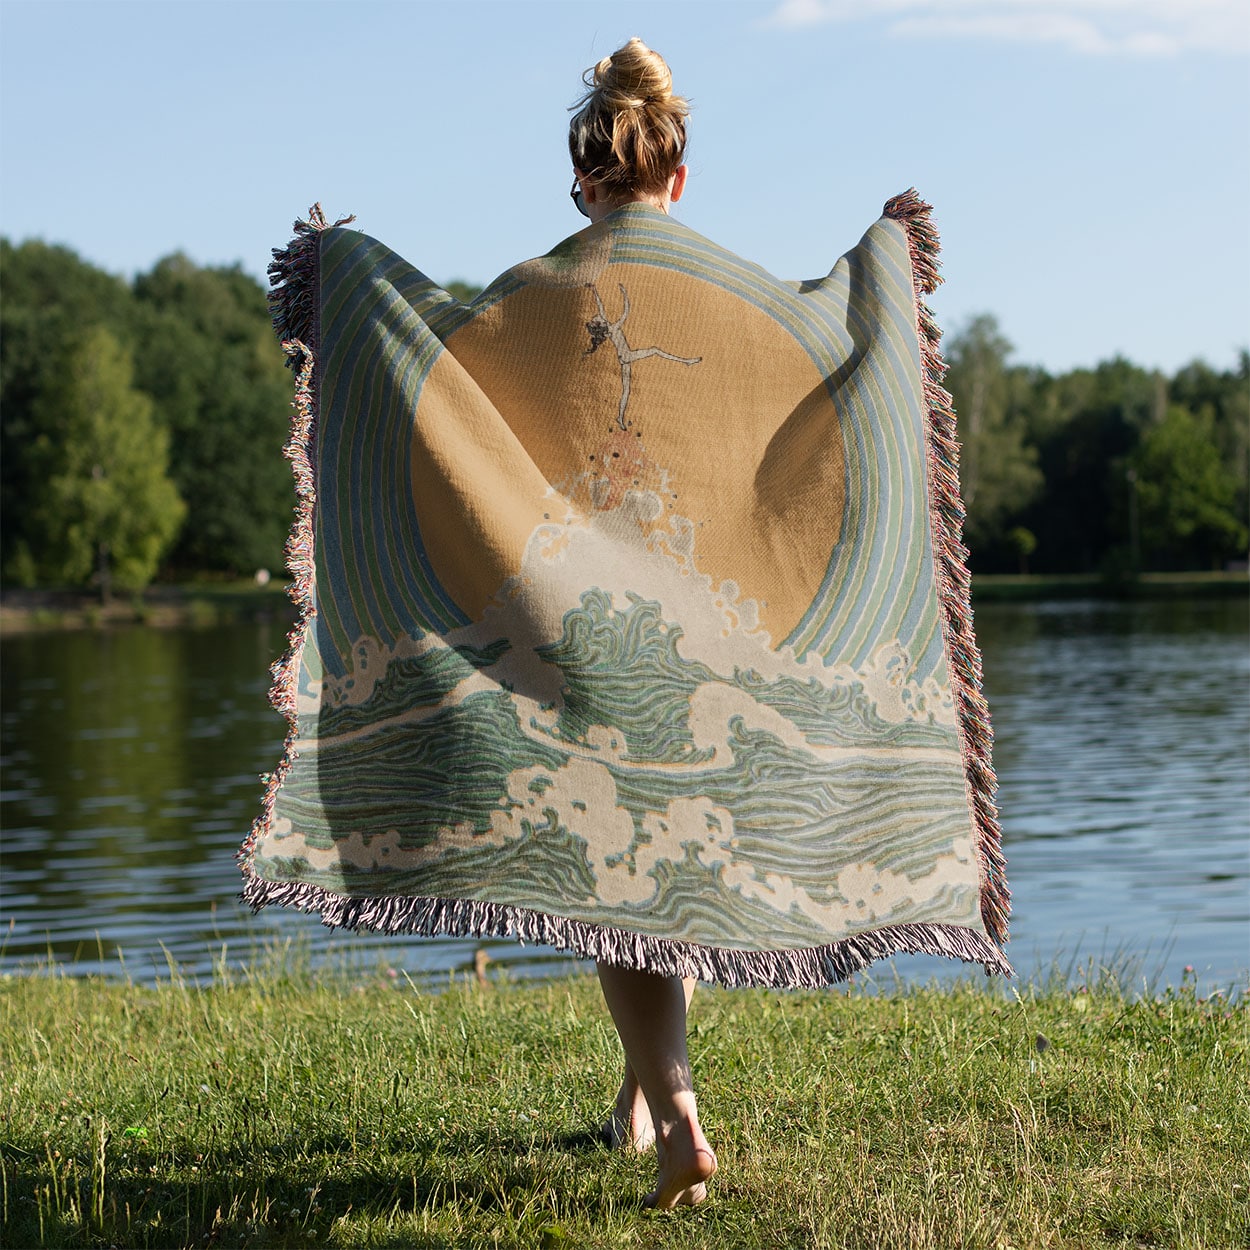 Reach for the Moon Woven Blanket Held on a Woman's Back Outside